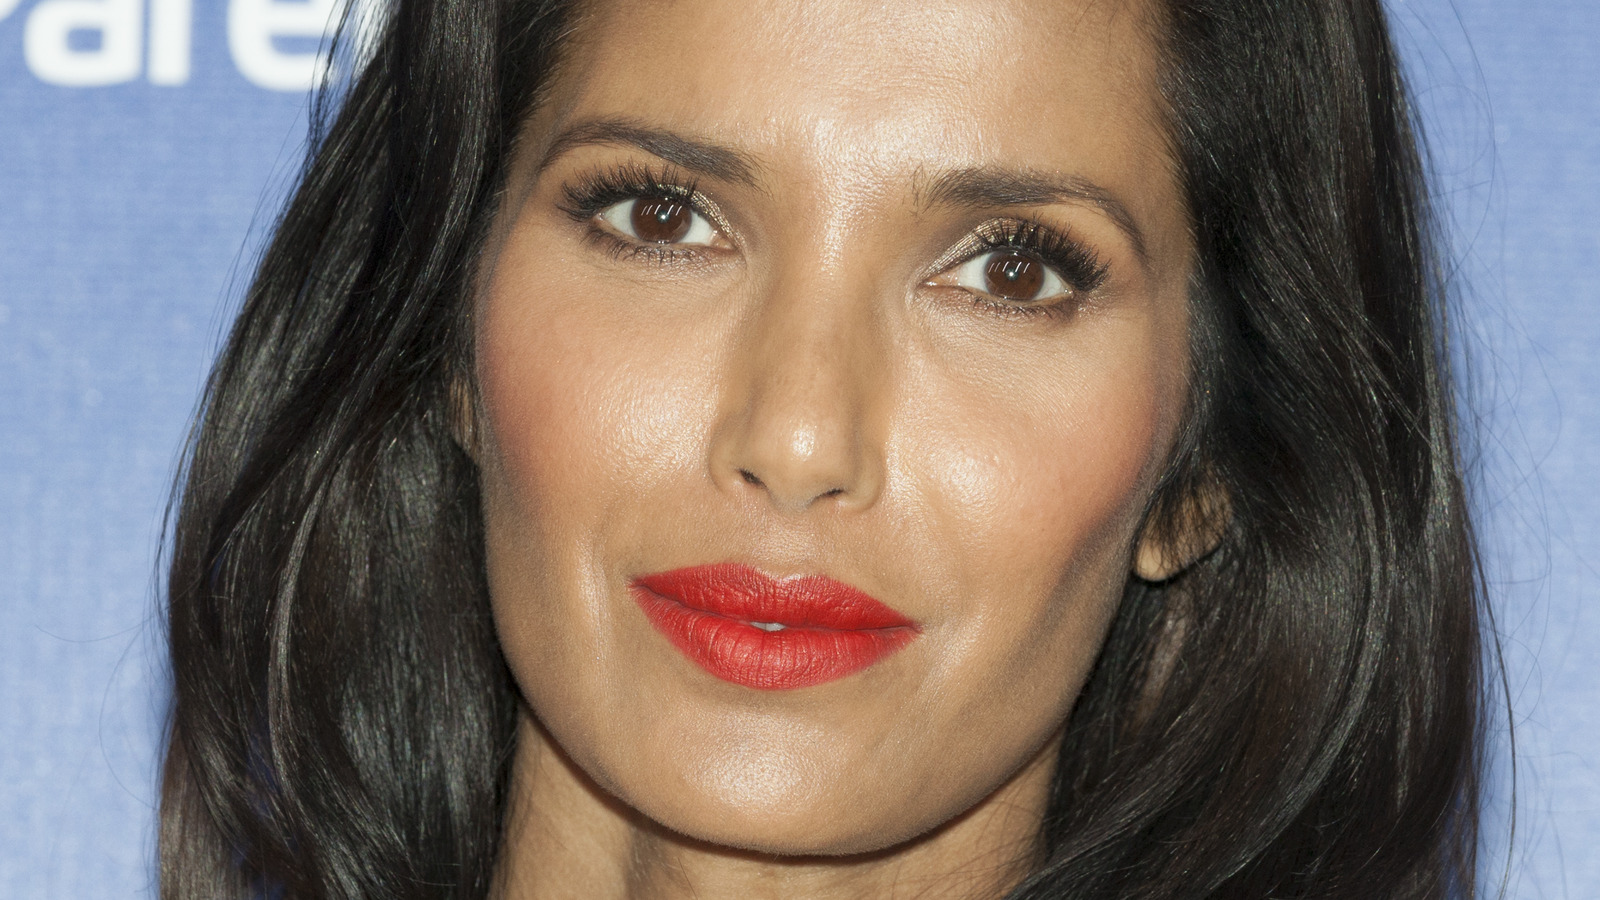 Padma Lakshmi Just Asked Fans For Help After Family Tragedy